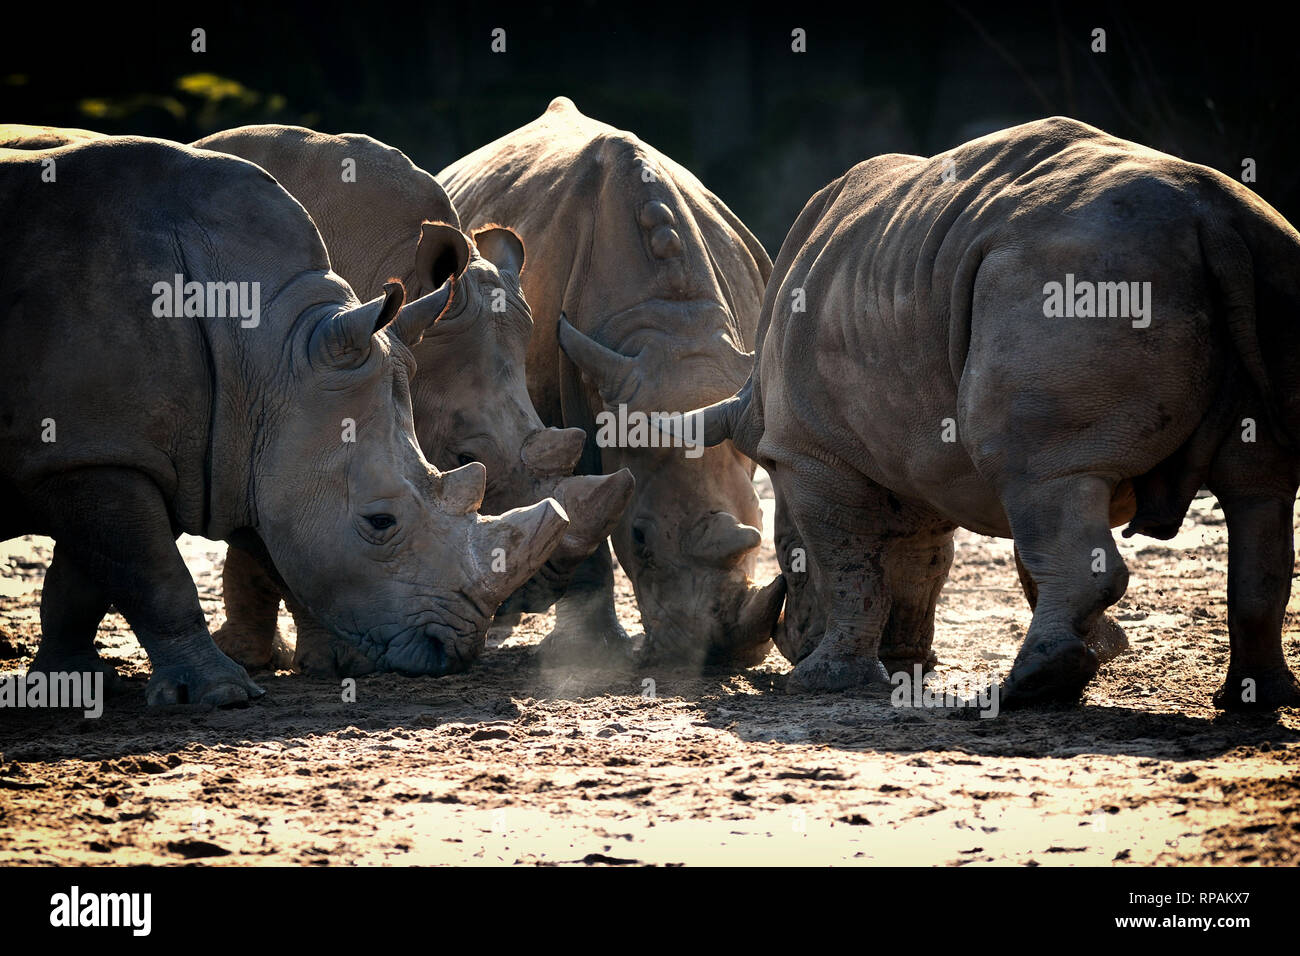 Dvur Kralove Nad Labem, Czech Republic. 21st Feb, 2019. A black rhinos bathing in the mud at Safari Park Dvur Kralove nad Labem on a sunny morning, February 21, 2019. The Safari Park Dvur Kralove is preparing the transfer of five rare black rhinoceros from European zoos, including its three own ones, to Rwanda. Apart from three rhinos from Dvur Kralove, the transfer, scheduled for late May or early June 2019, will involve one from Britain's Flamingo Land zoo and one from the Danish Ree Park Safari zoo. Credit: Slavek Ruta/ZUMA Wire/Alamy Live News Stock Photo